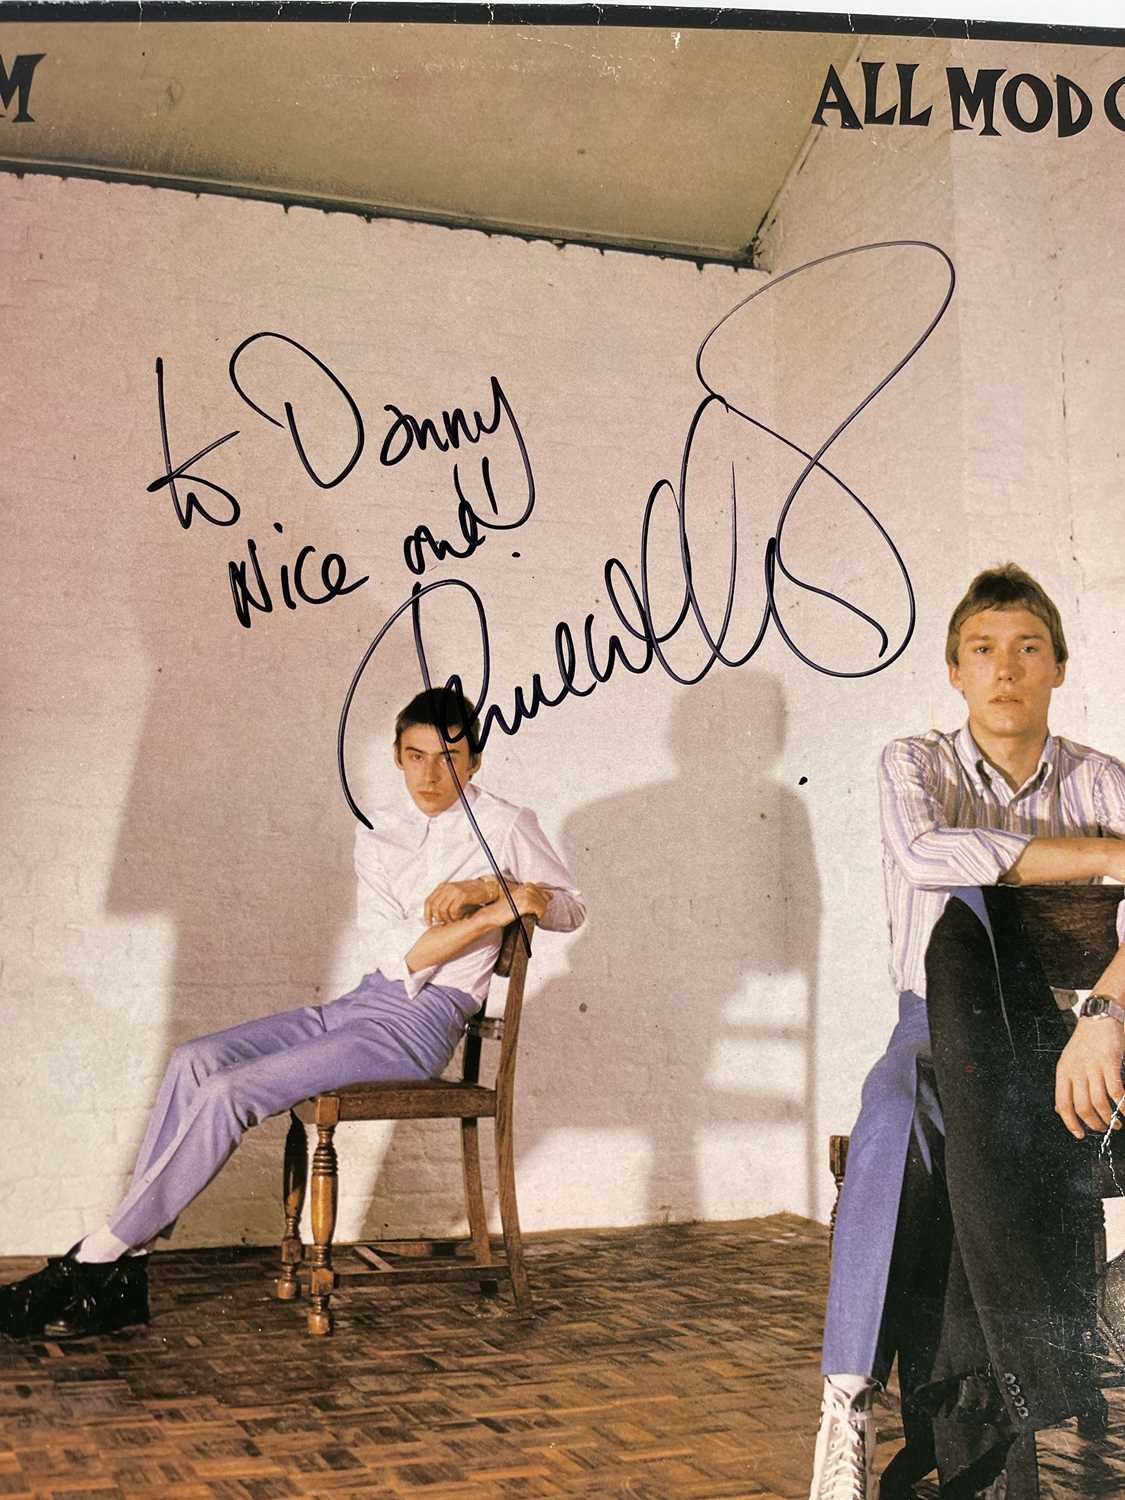 THE JAM - PAUL WELLER SIGNED COPY OF ALL MOD CONS. - Image 2 of 4